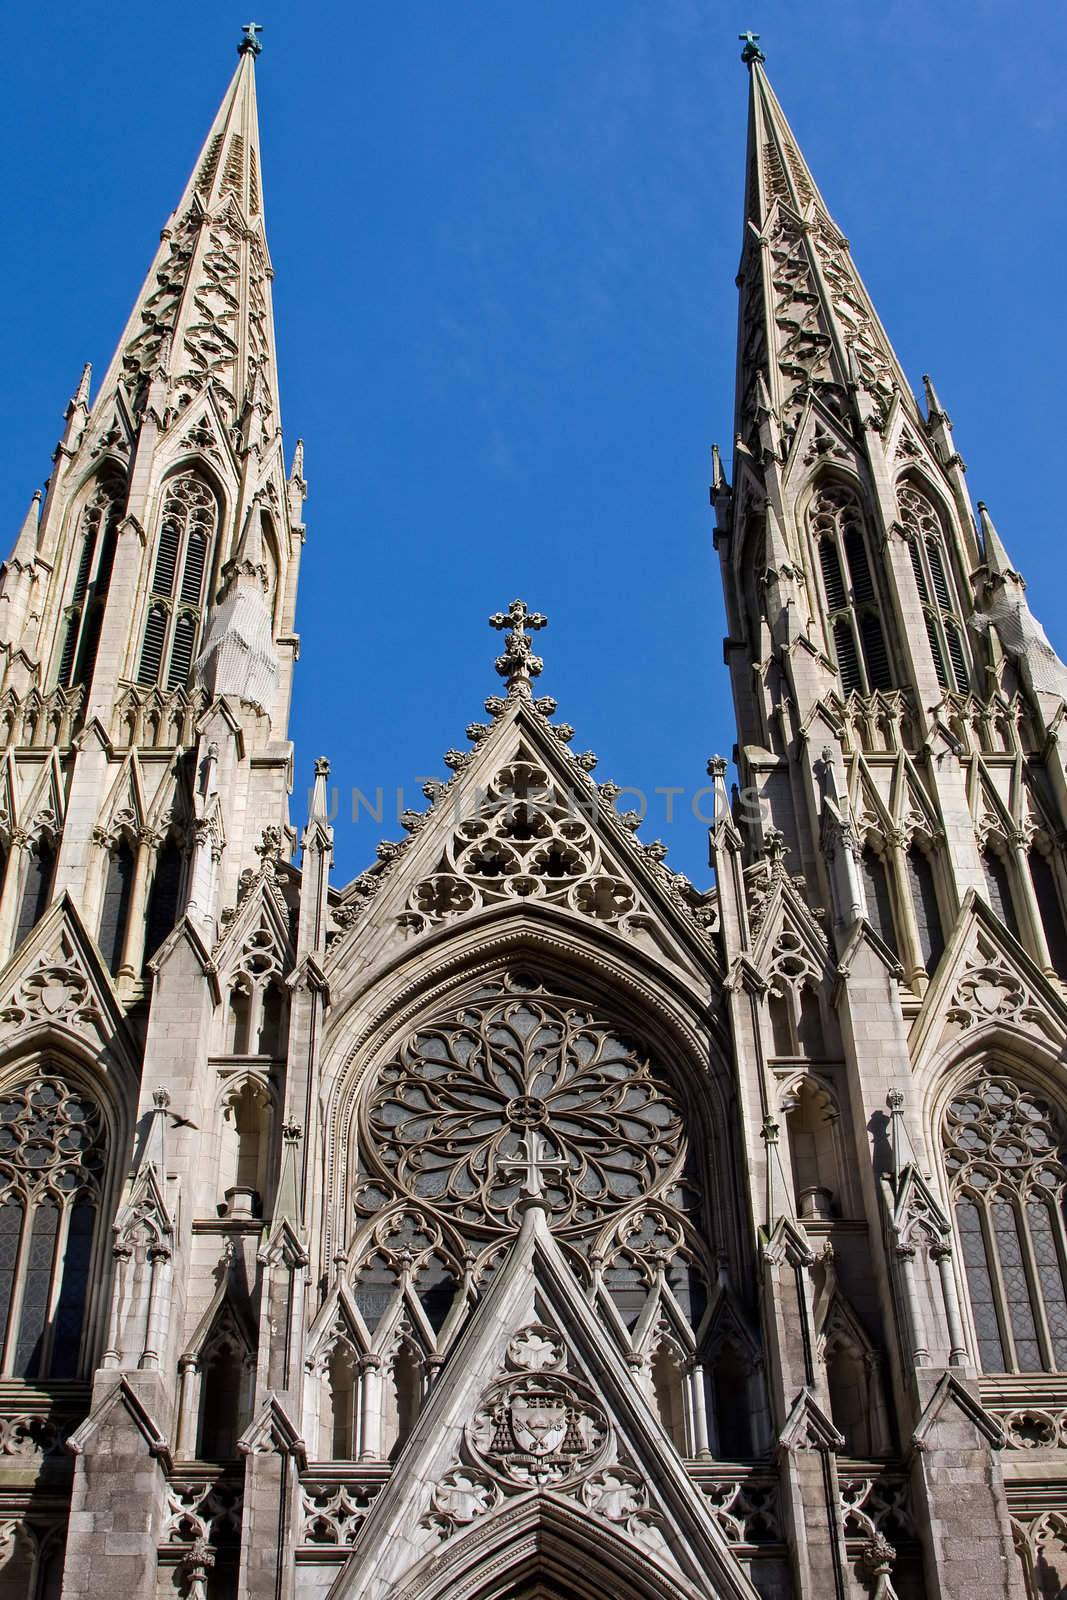 The facade of the Saint Patrick Cathedral in New York City on a deep blue sky